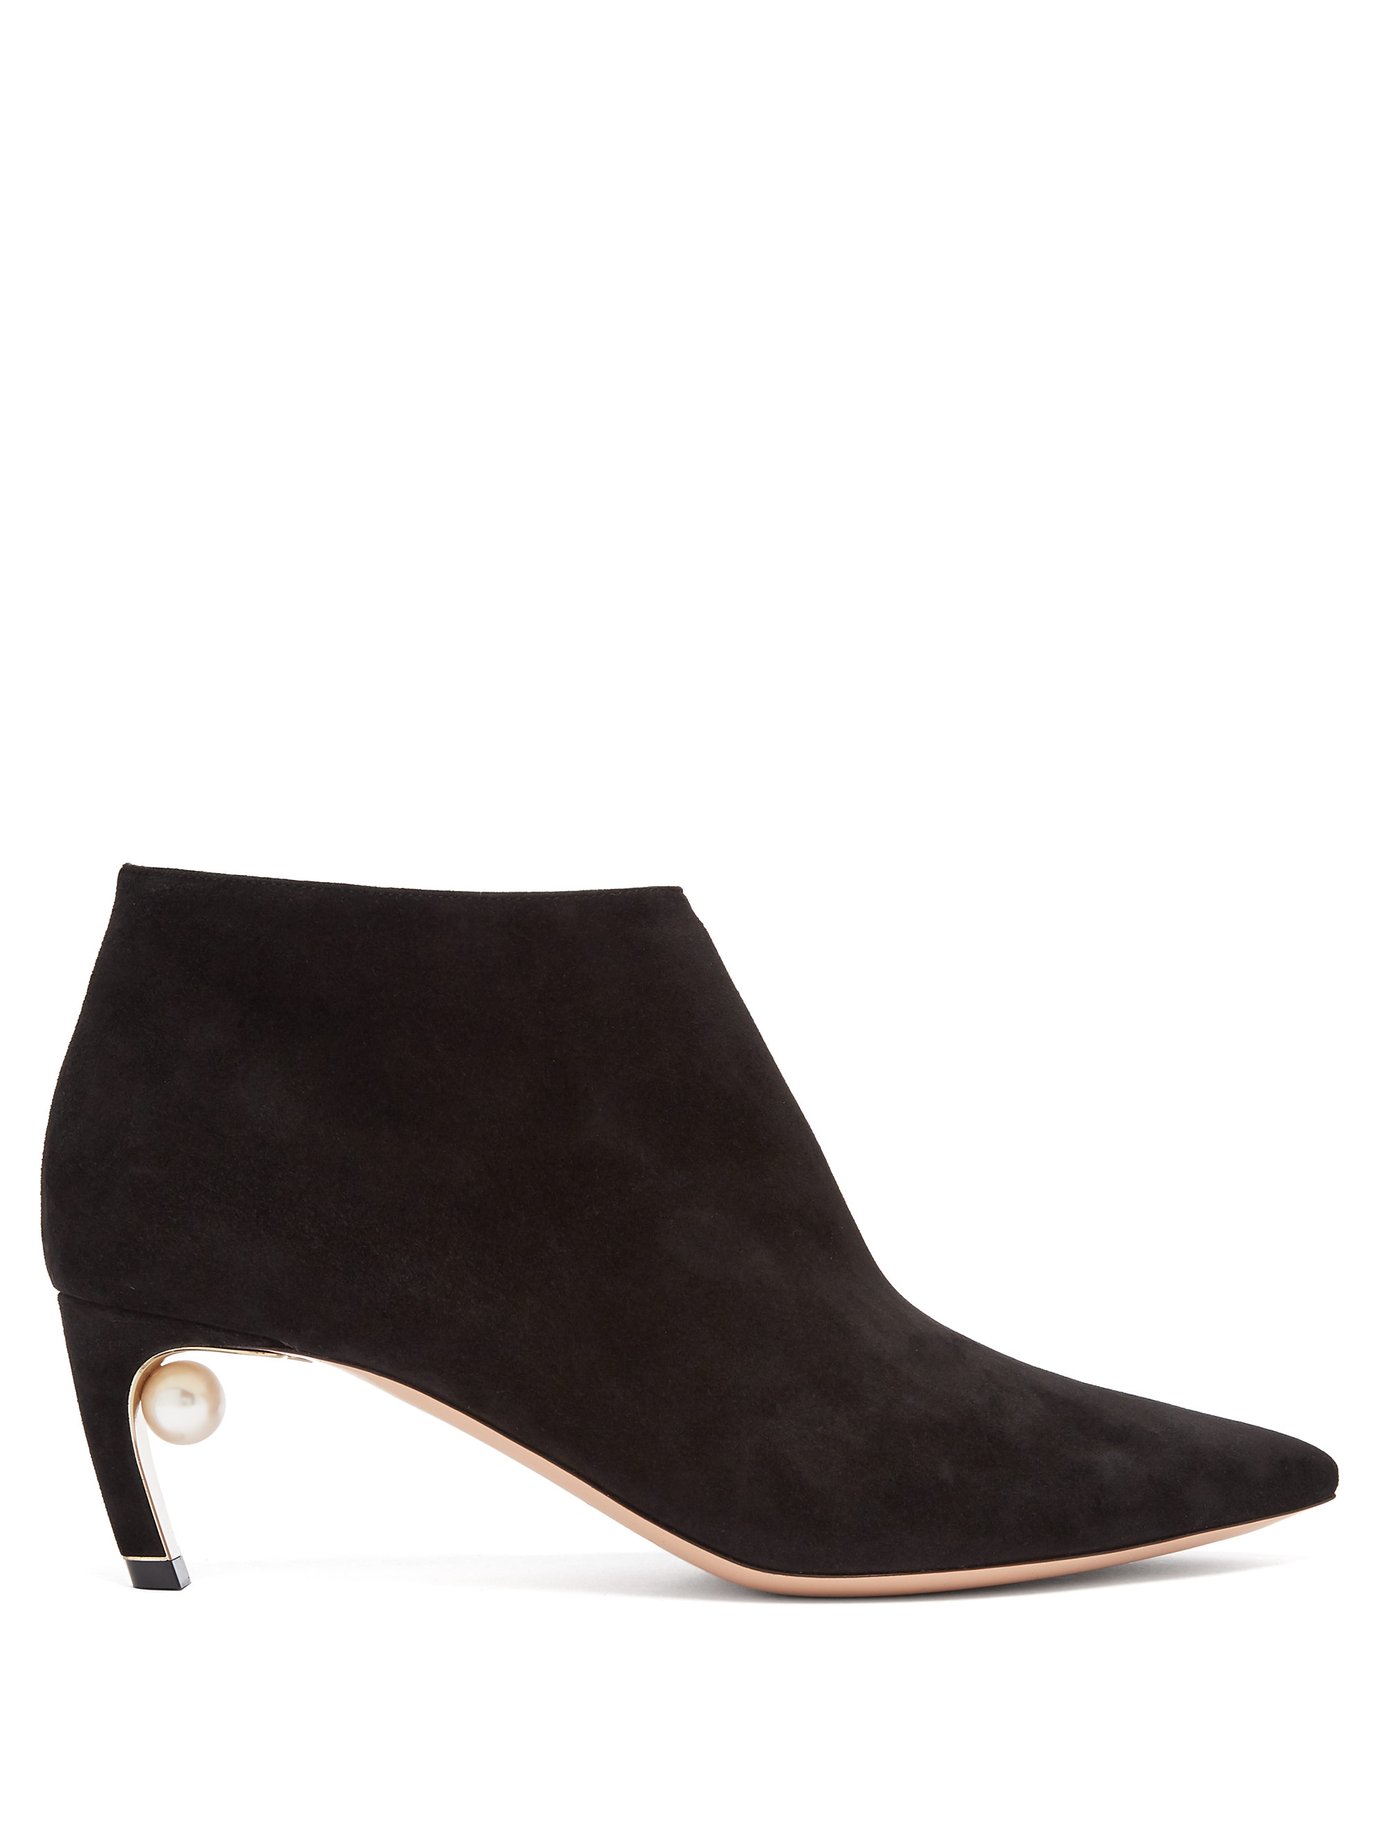 Nicholas Kirkwood - Mira Pearl-Heeled Suede Ankle Boots - Black | ABOUT ...